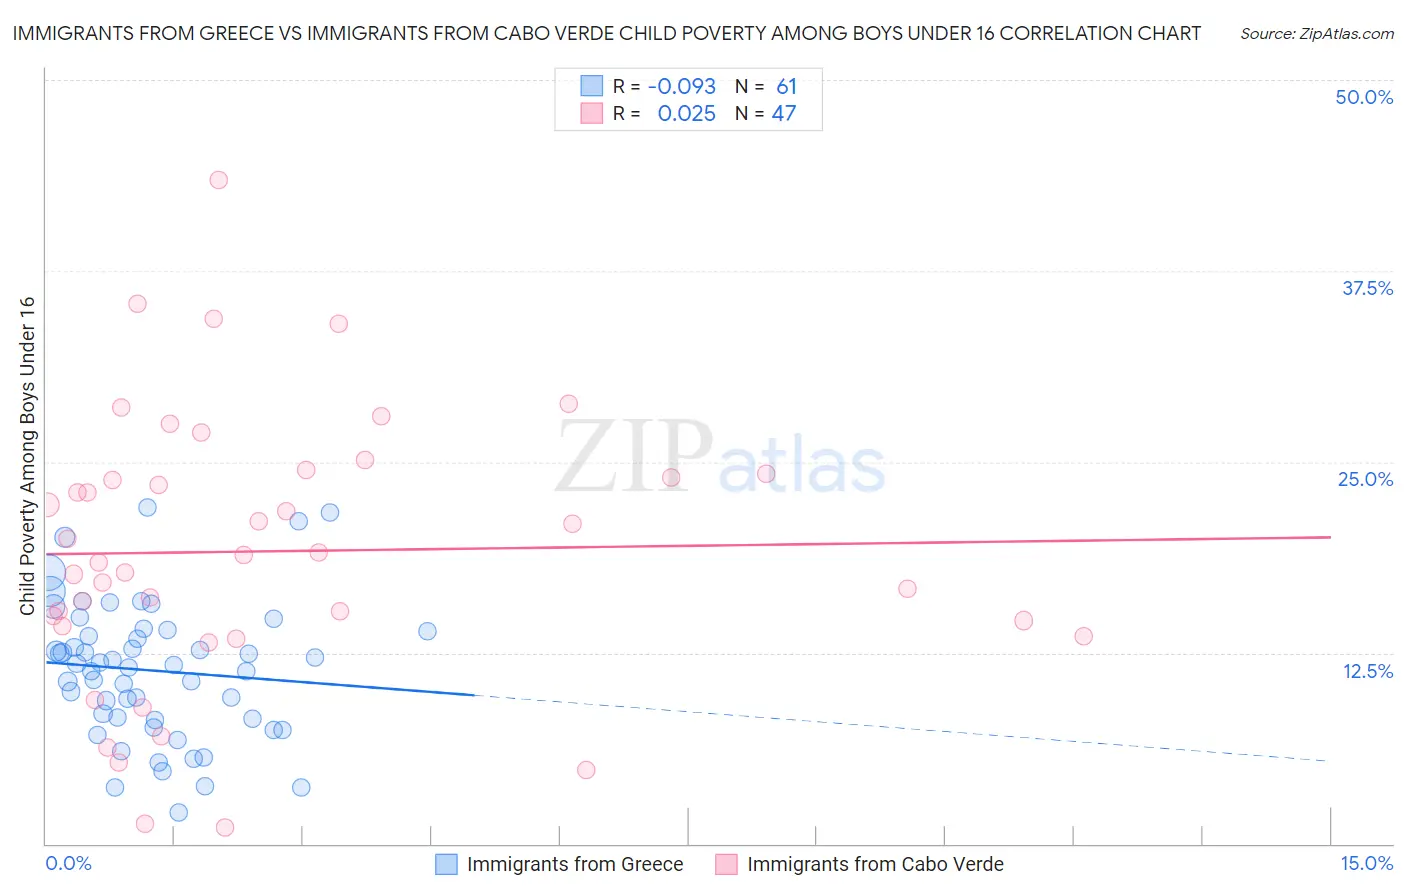 Immigrants from Greece vs Immigrants from Cabo Verde Child Poverty Among Boys Under 16